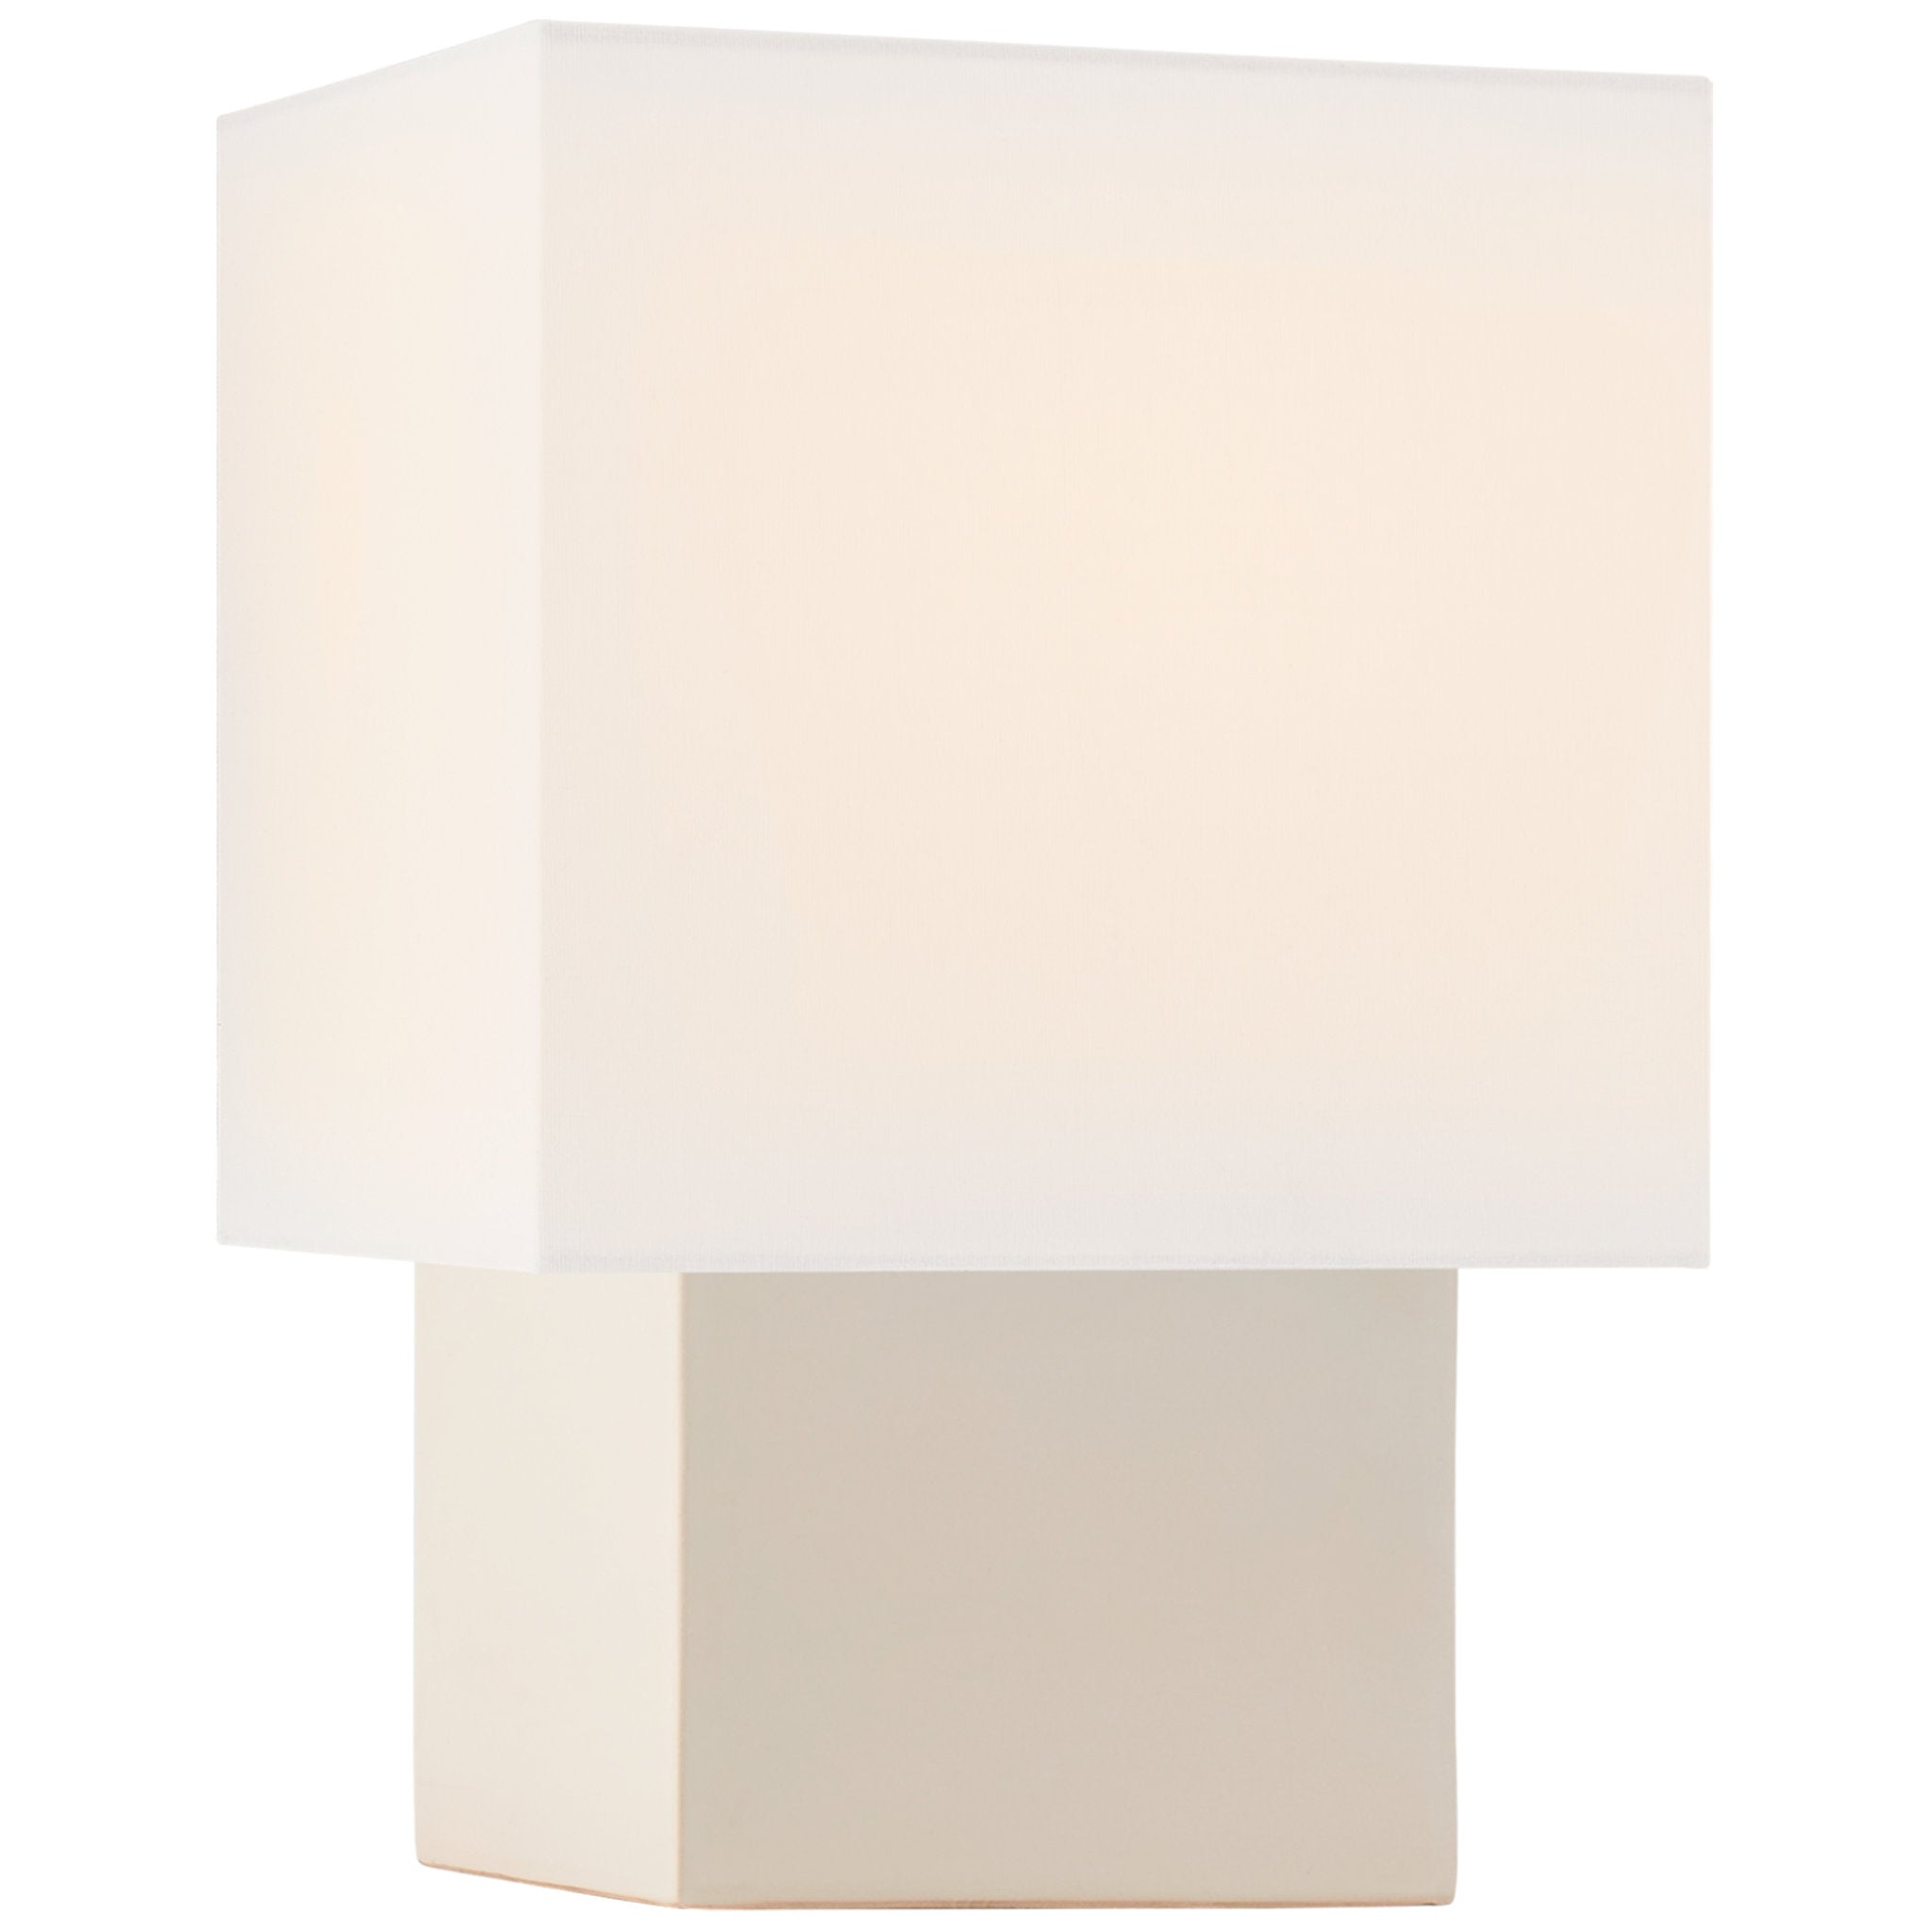 Kelly Wearstler Pari Small Square Table Lamp in Ivory with Linen Shade